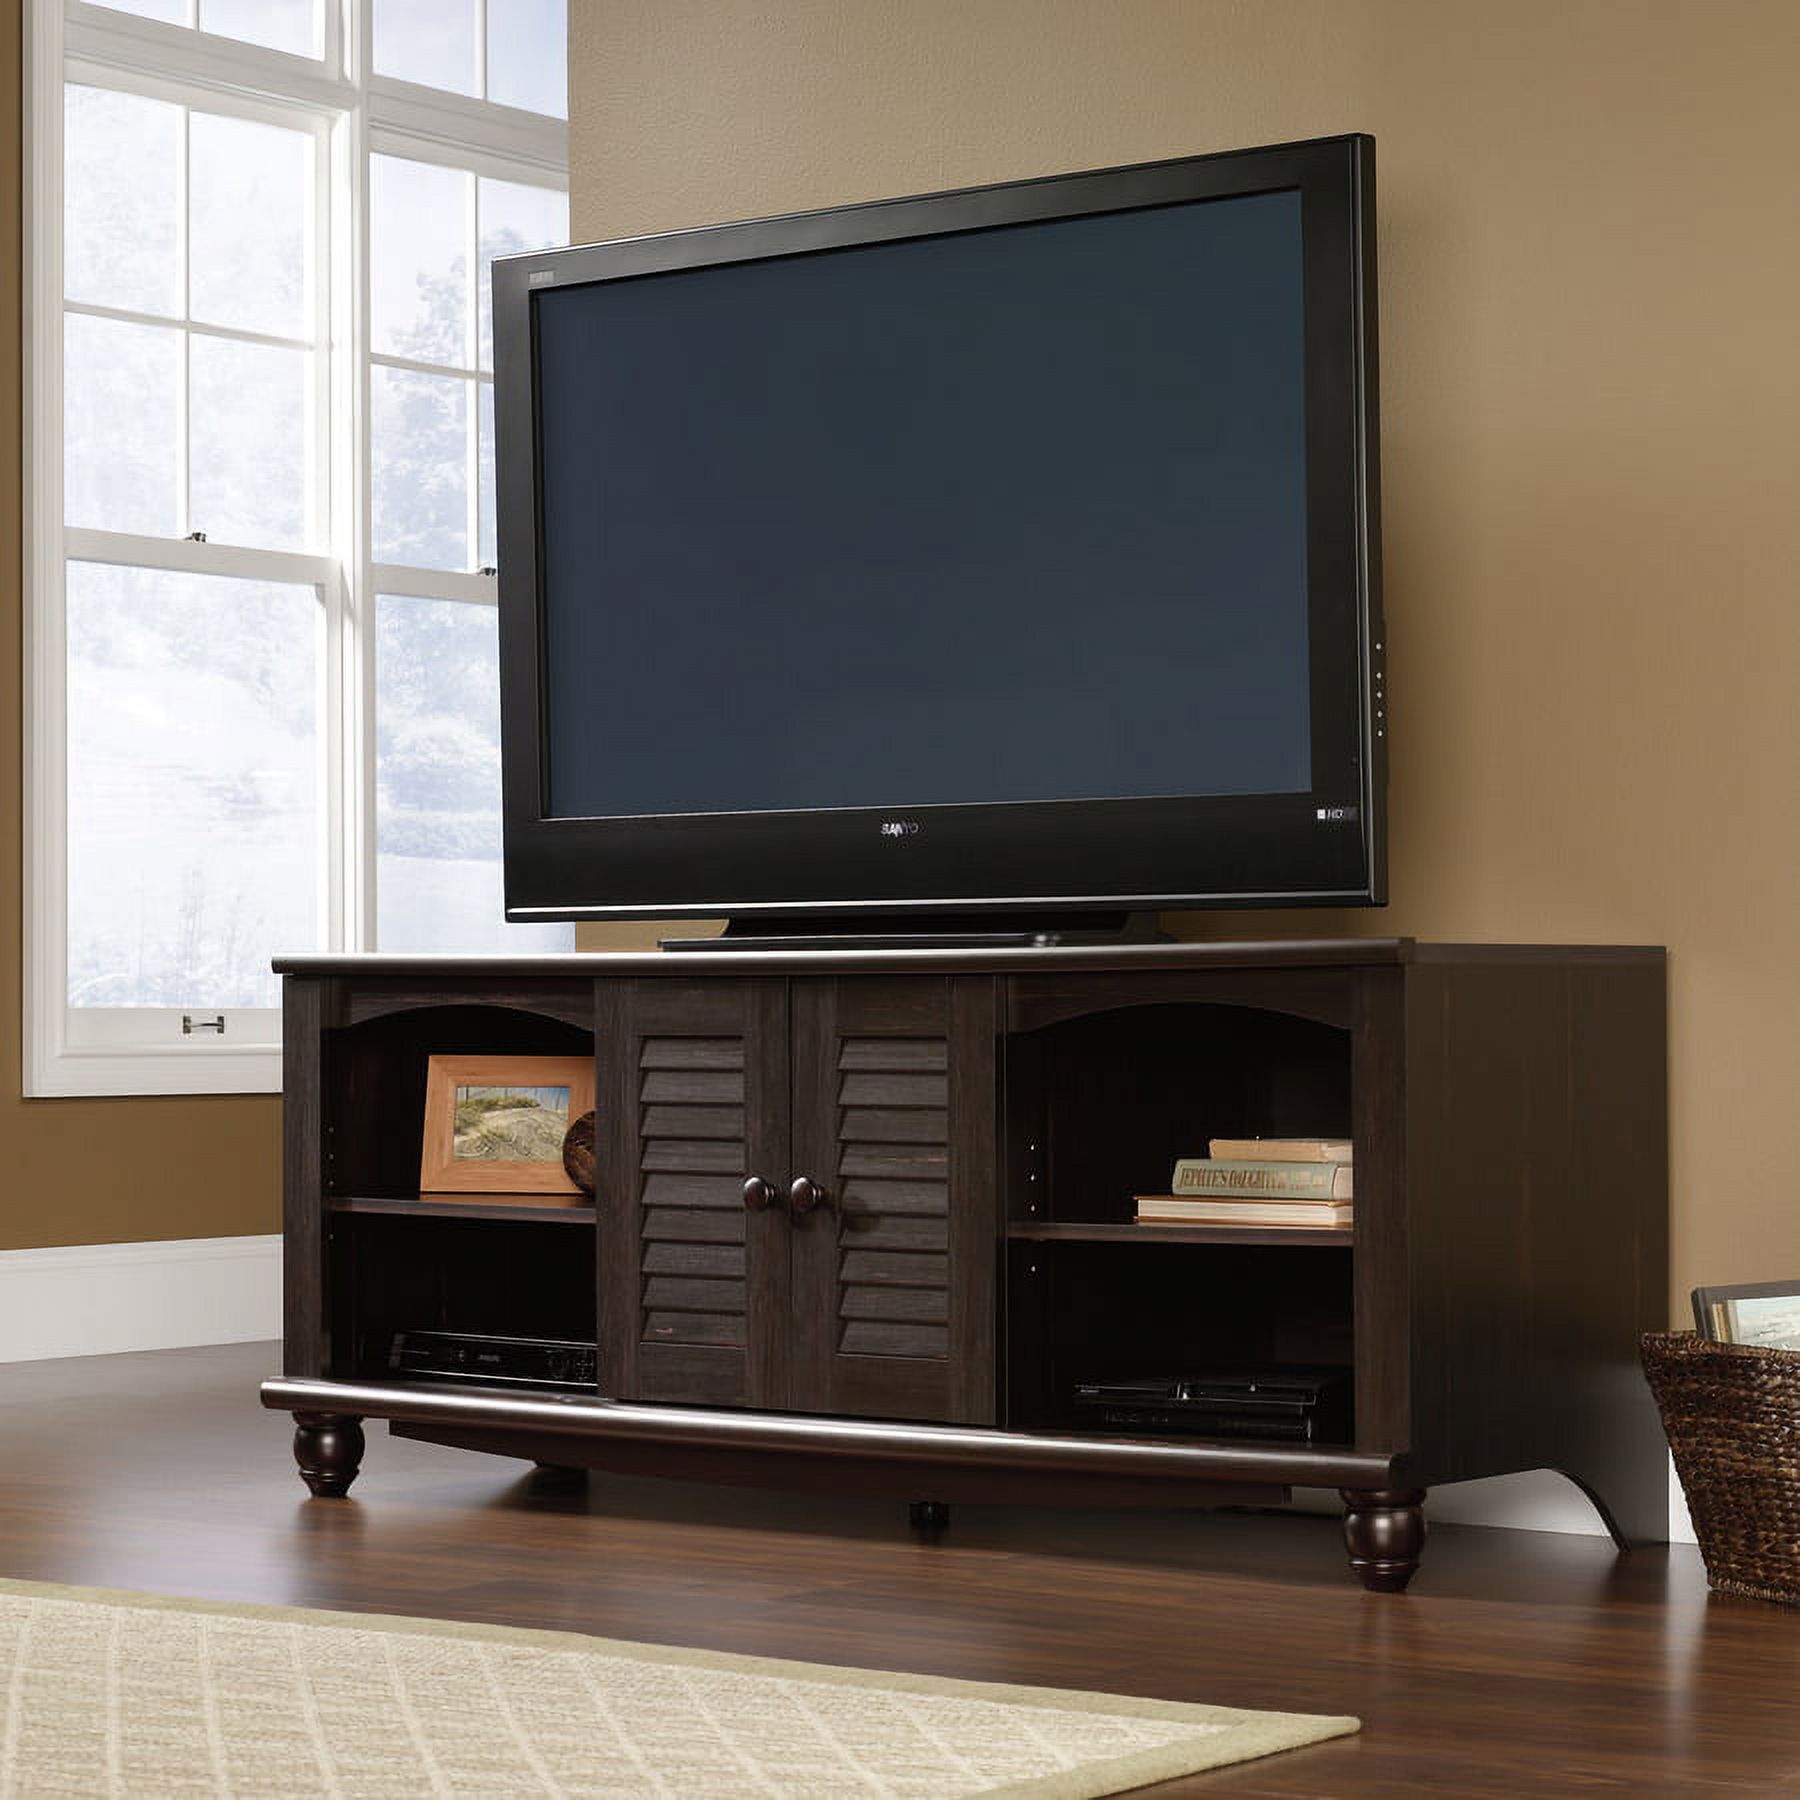 Sauder Harbor View TV Stand for TVs up to 60", Antiqued Paint Finish - image 3 of 4